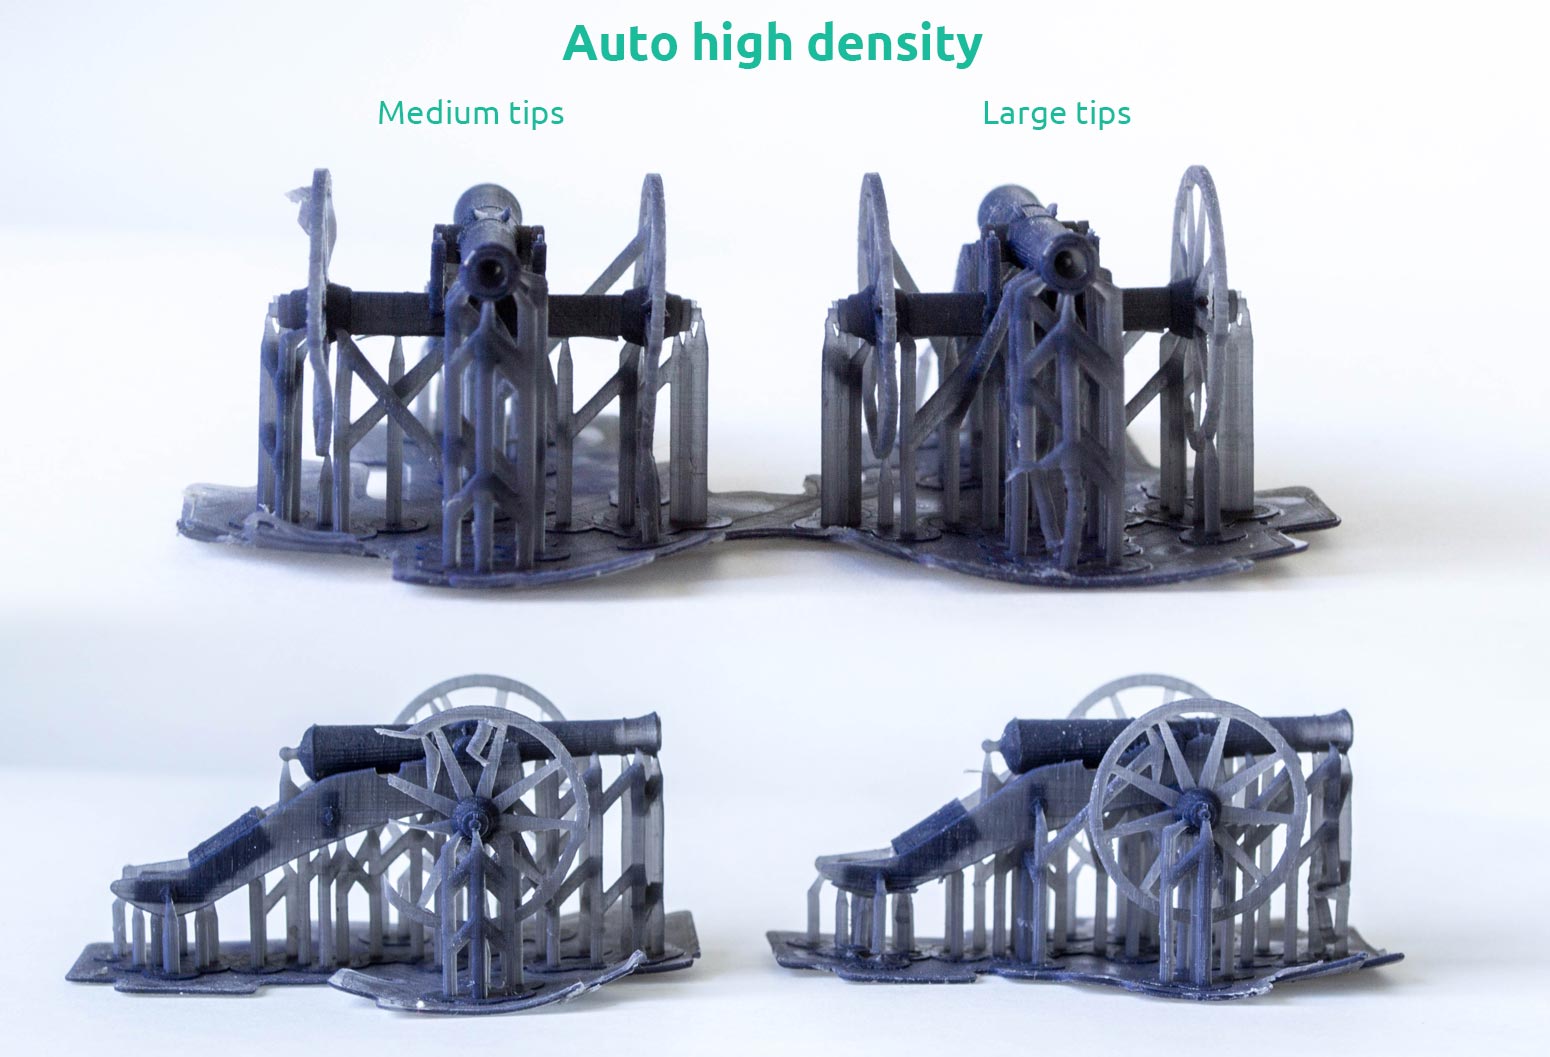 AmeraLabs key principles of 3D printing supports that work experiment moai 3D printed cannons high density